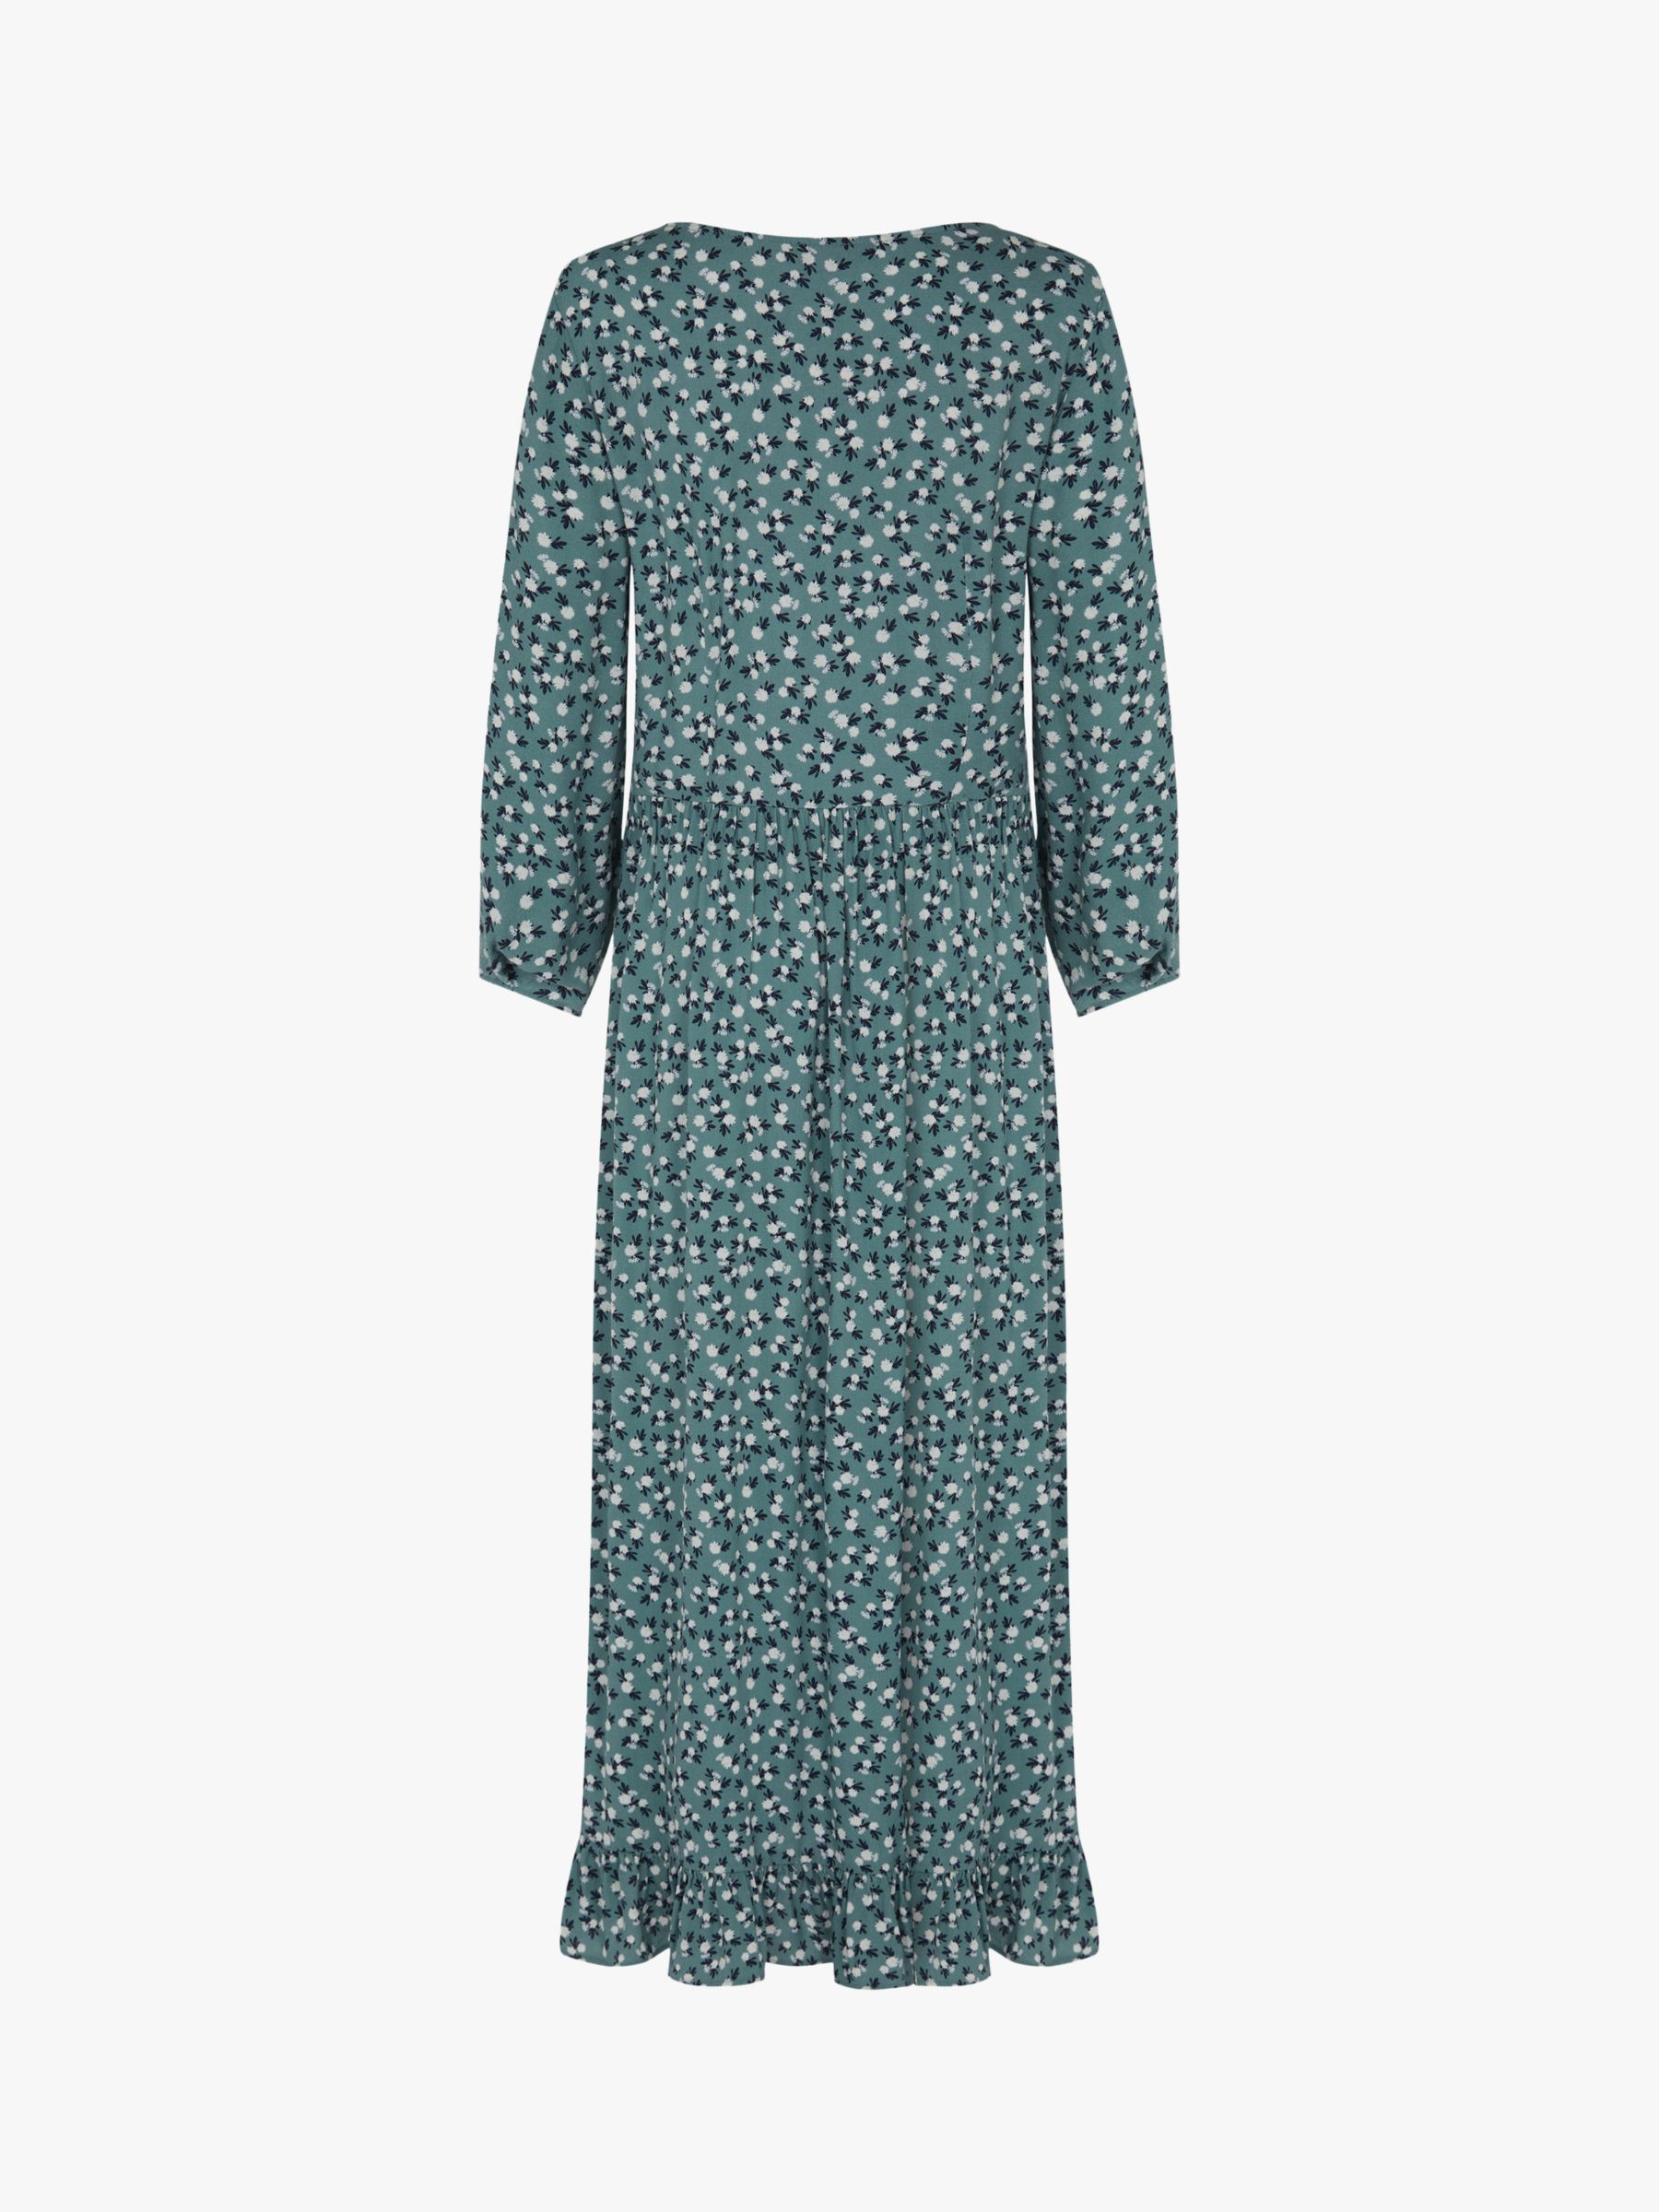 Ghost Rosina Ditsy Floral Dress, Blue at John Lewis & Partners